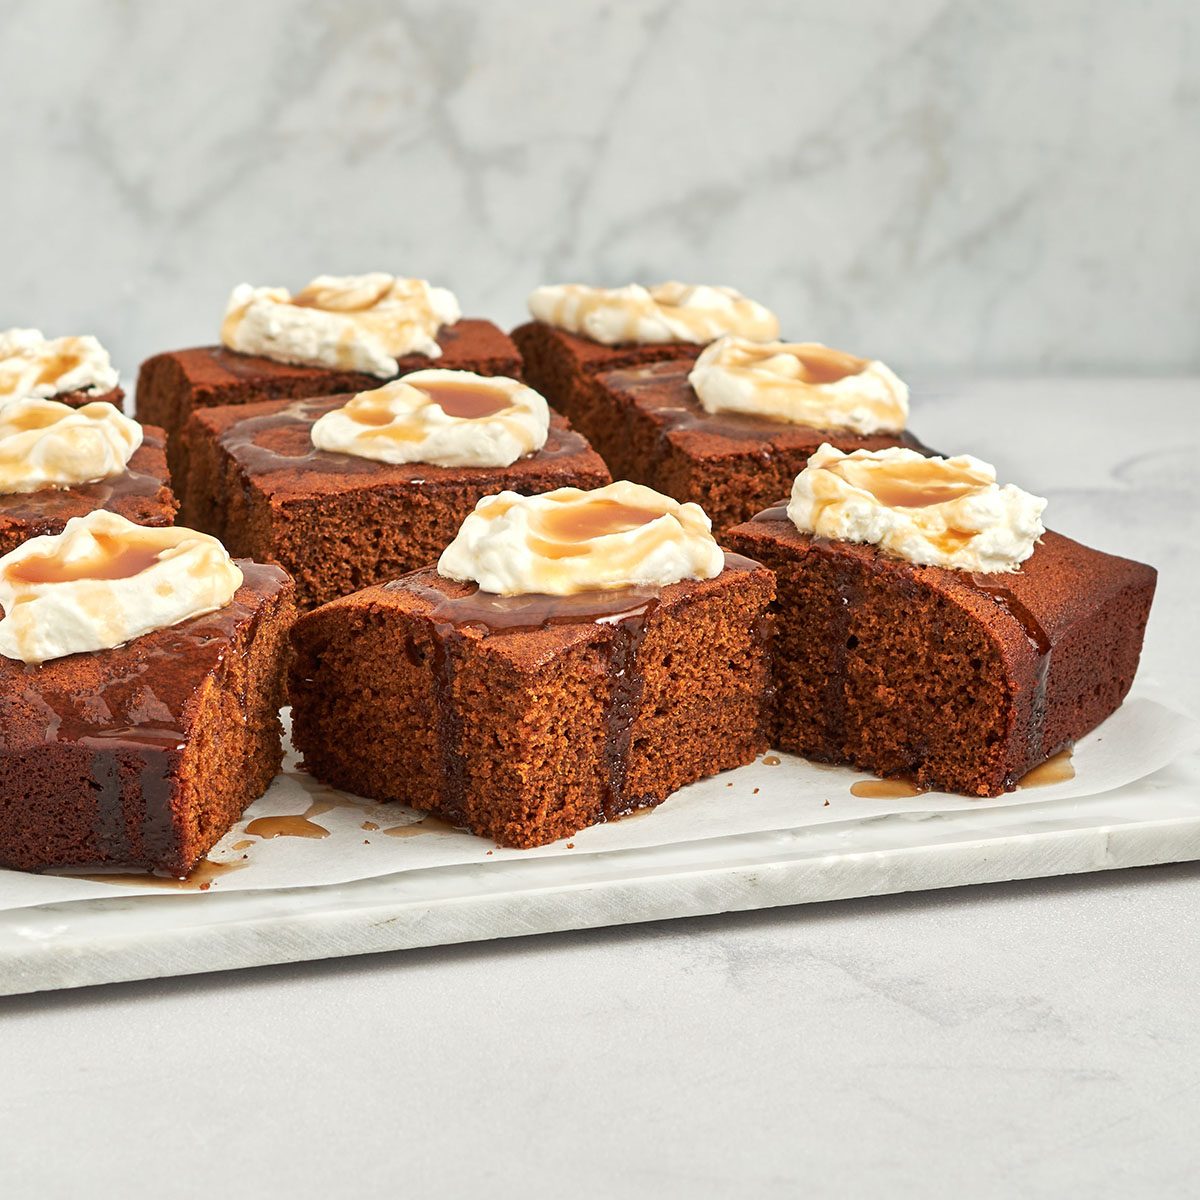 Indulge in the ultimate warming treat with a homemade gingerbread cake by Taste of Home.